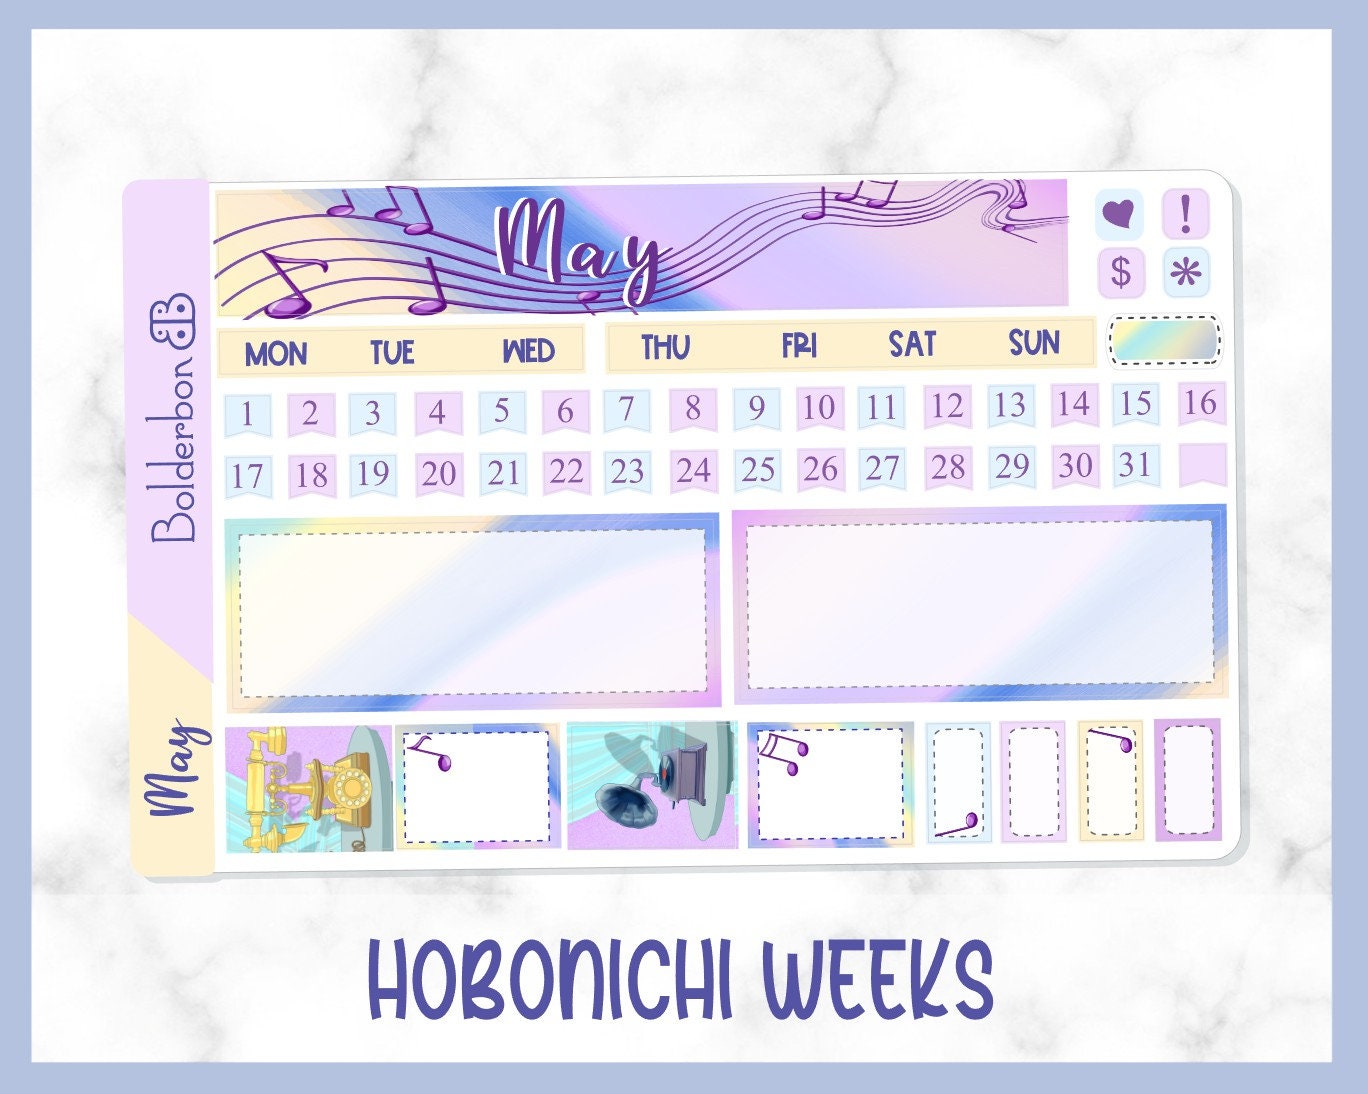 MAY Hobonichi Weeks || Hand Drawn Music Sticker Kit Monthly Planner Stickers for Hobo Weeks